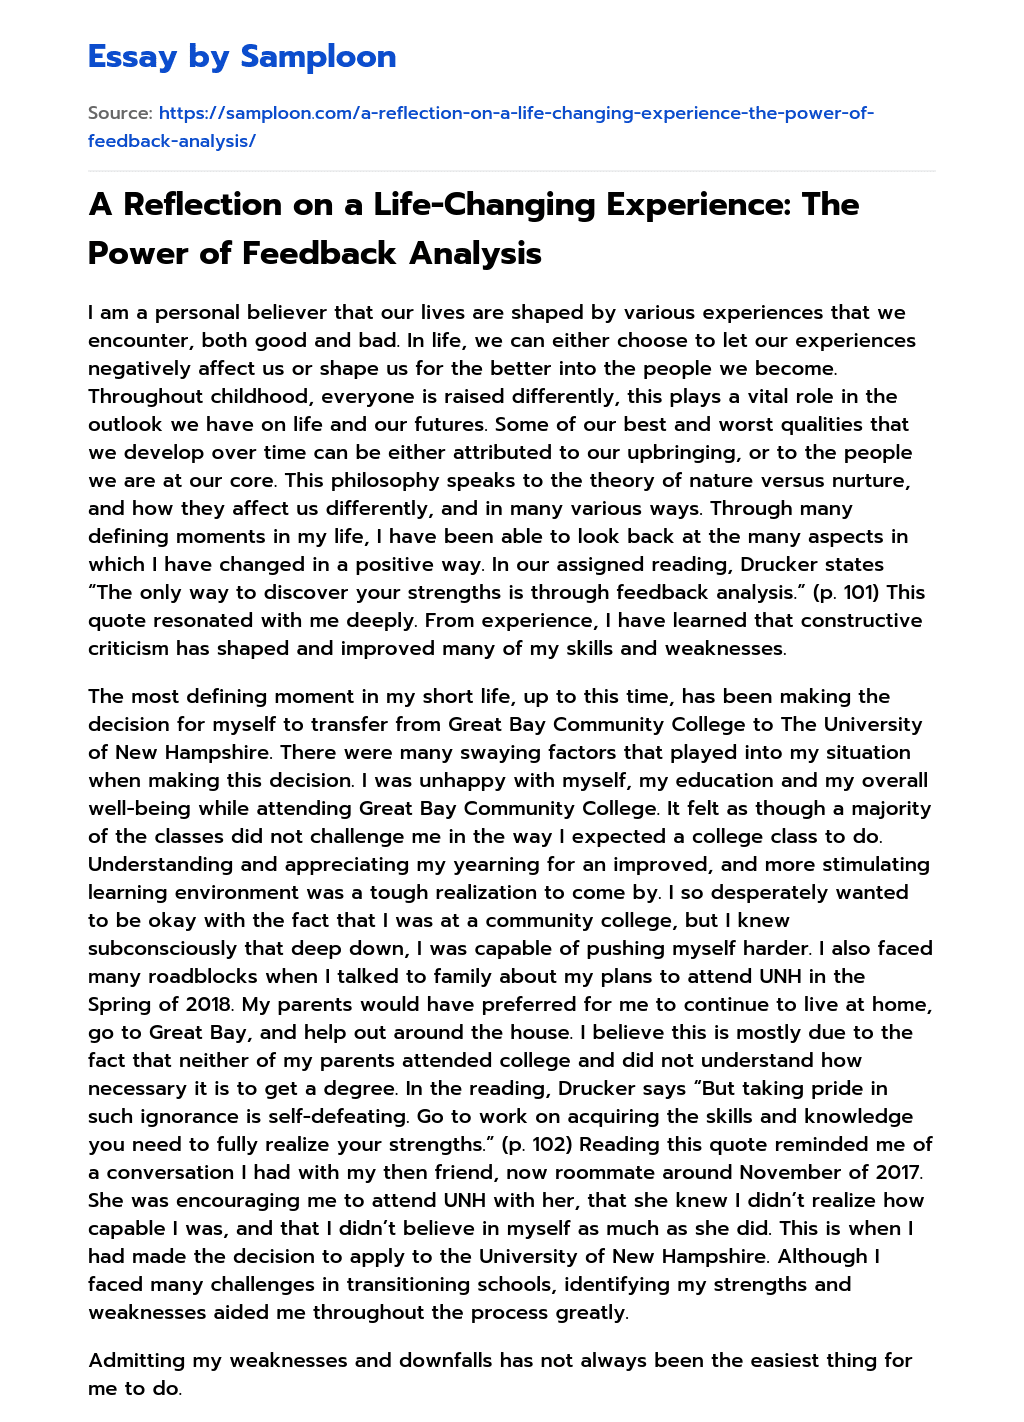 A Reflection on a Life-Changing Experience: The Power of Feedback Analysis essay